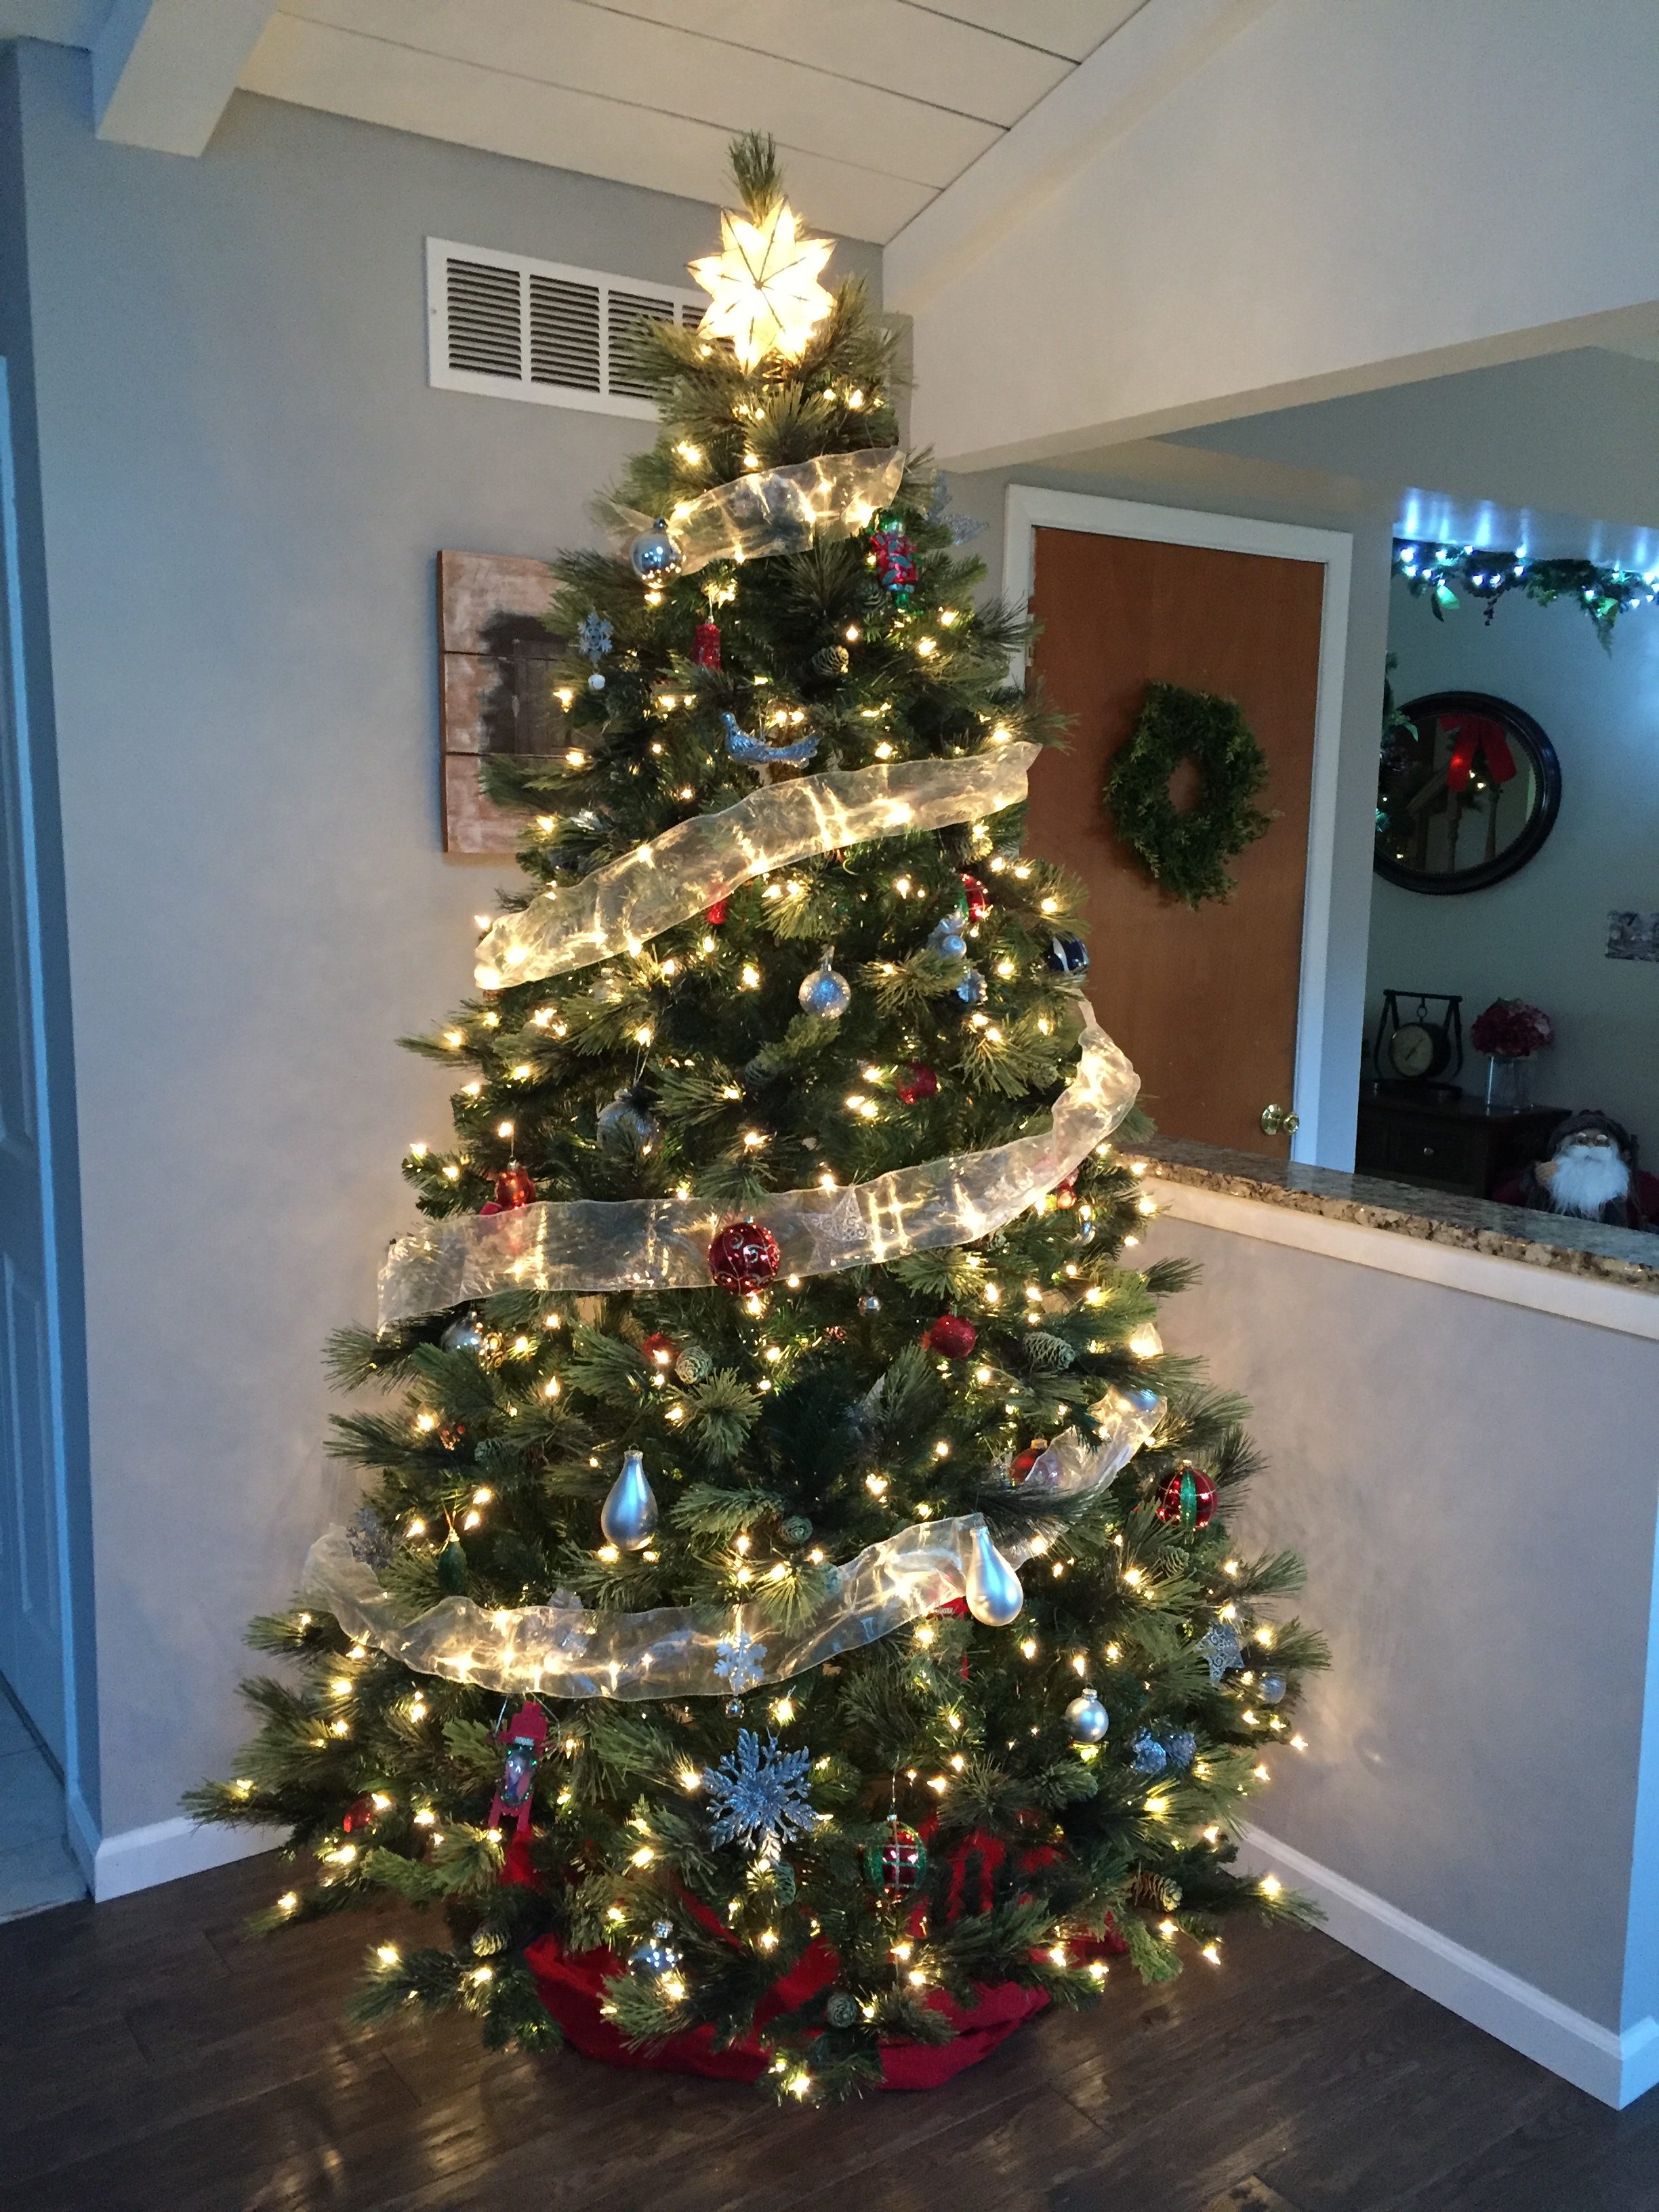 The Best Artificial Christmas Tree - The Kelly Homestead How Much Does A Christmas Tree Weigh